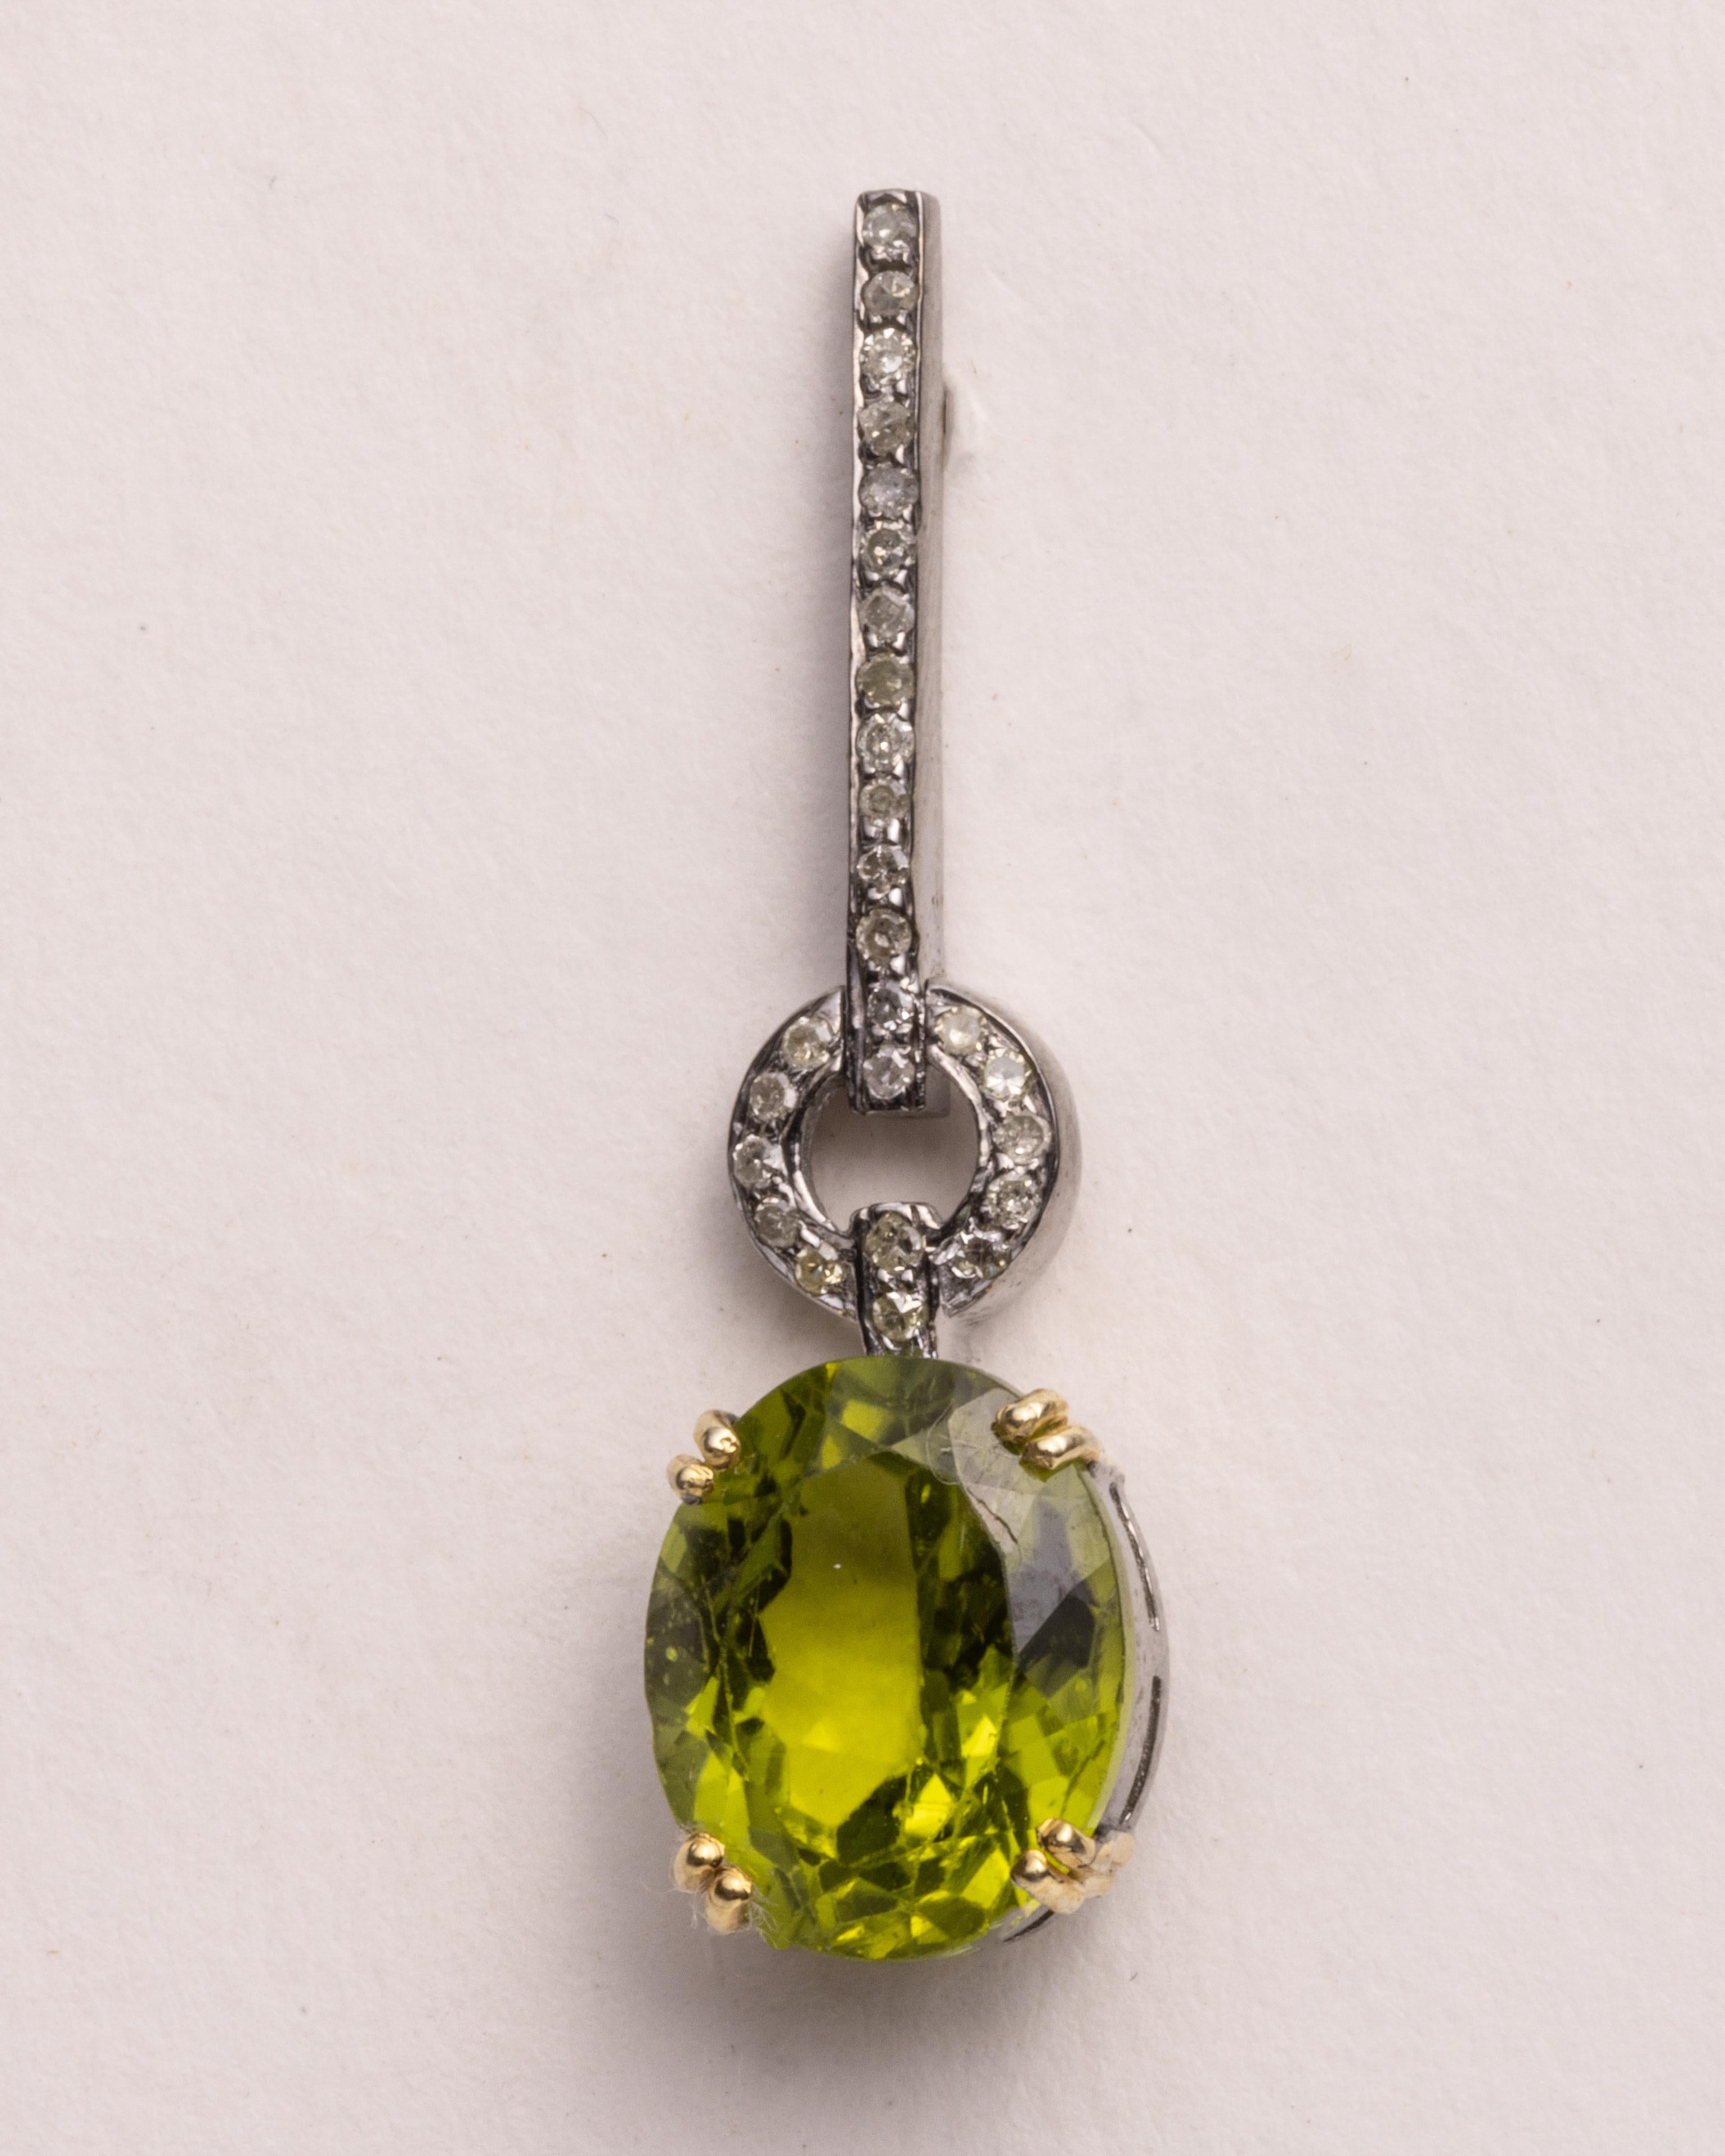 A lovely pair of drop earrings with large, faceted oval peridot gemstones with round, brilliant cut diamonds in a pave` 8..setting in sterling silver.  18K gold post for pierced ears.  Carat weight of peridot stones total 8.55 carats.  Diamonds